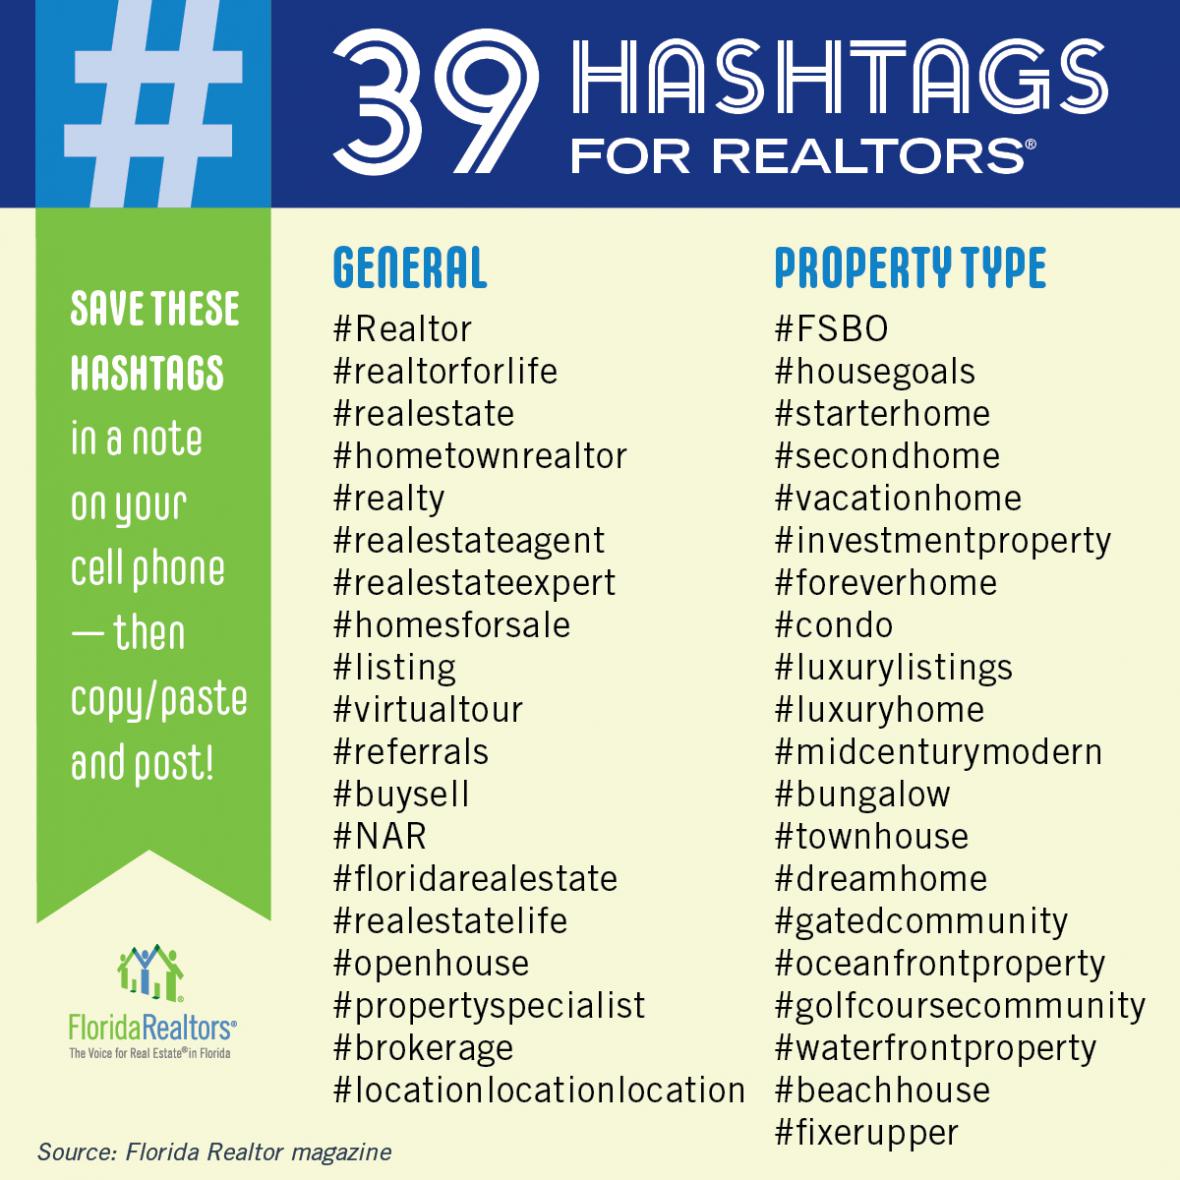 39 hashtags for Realtors infographic